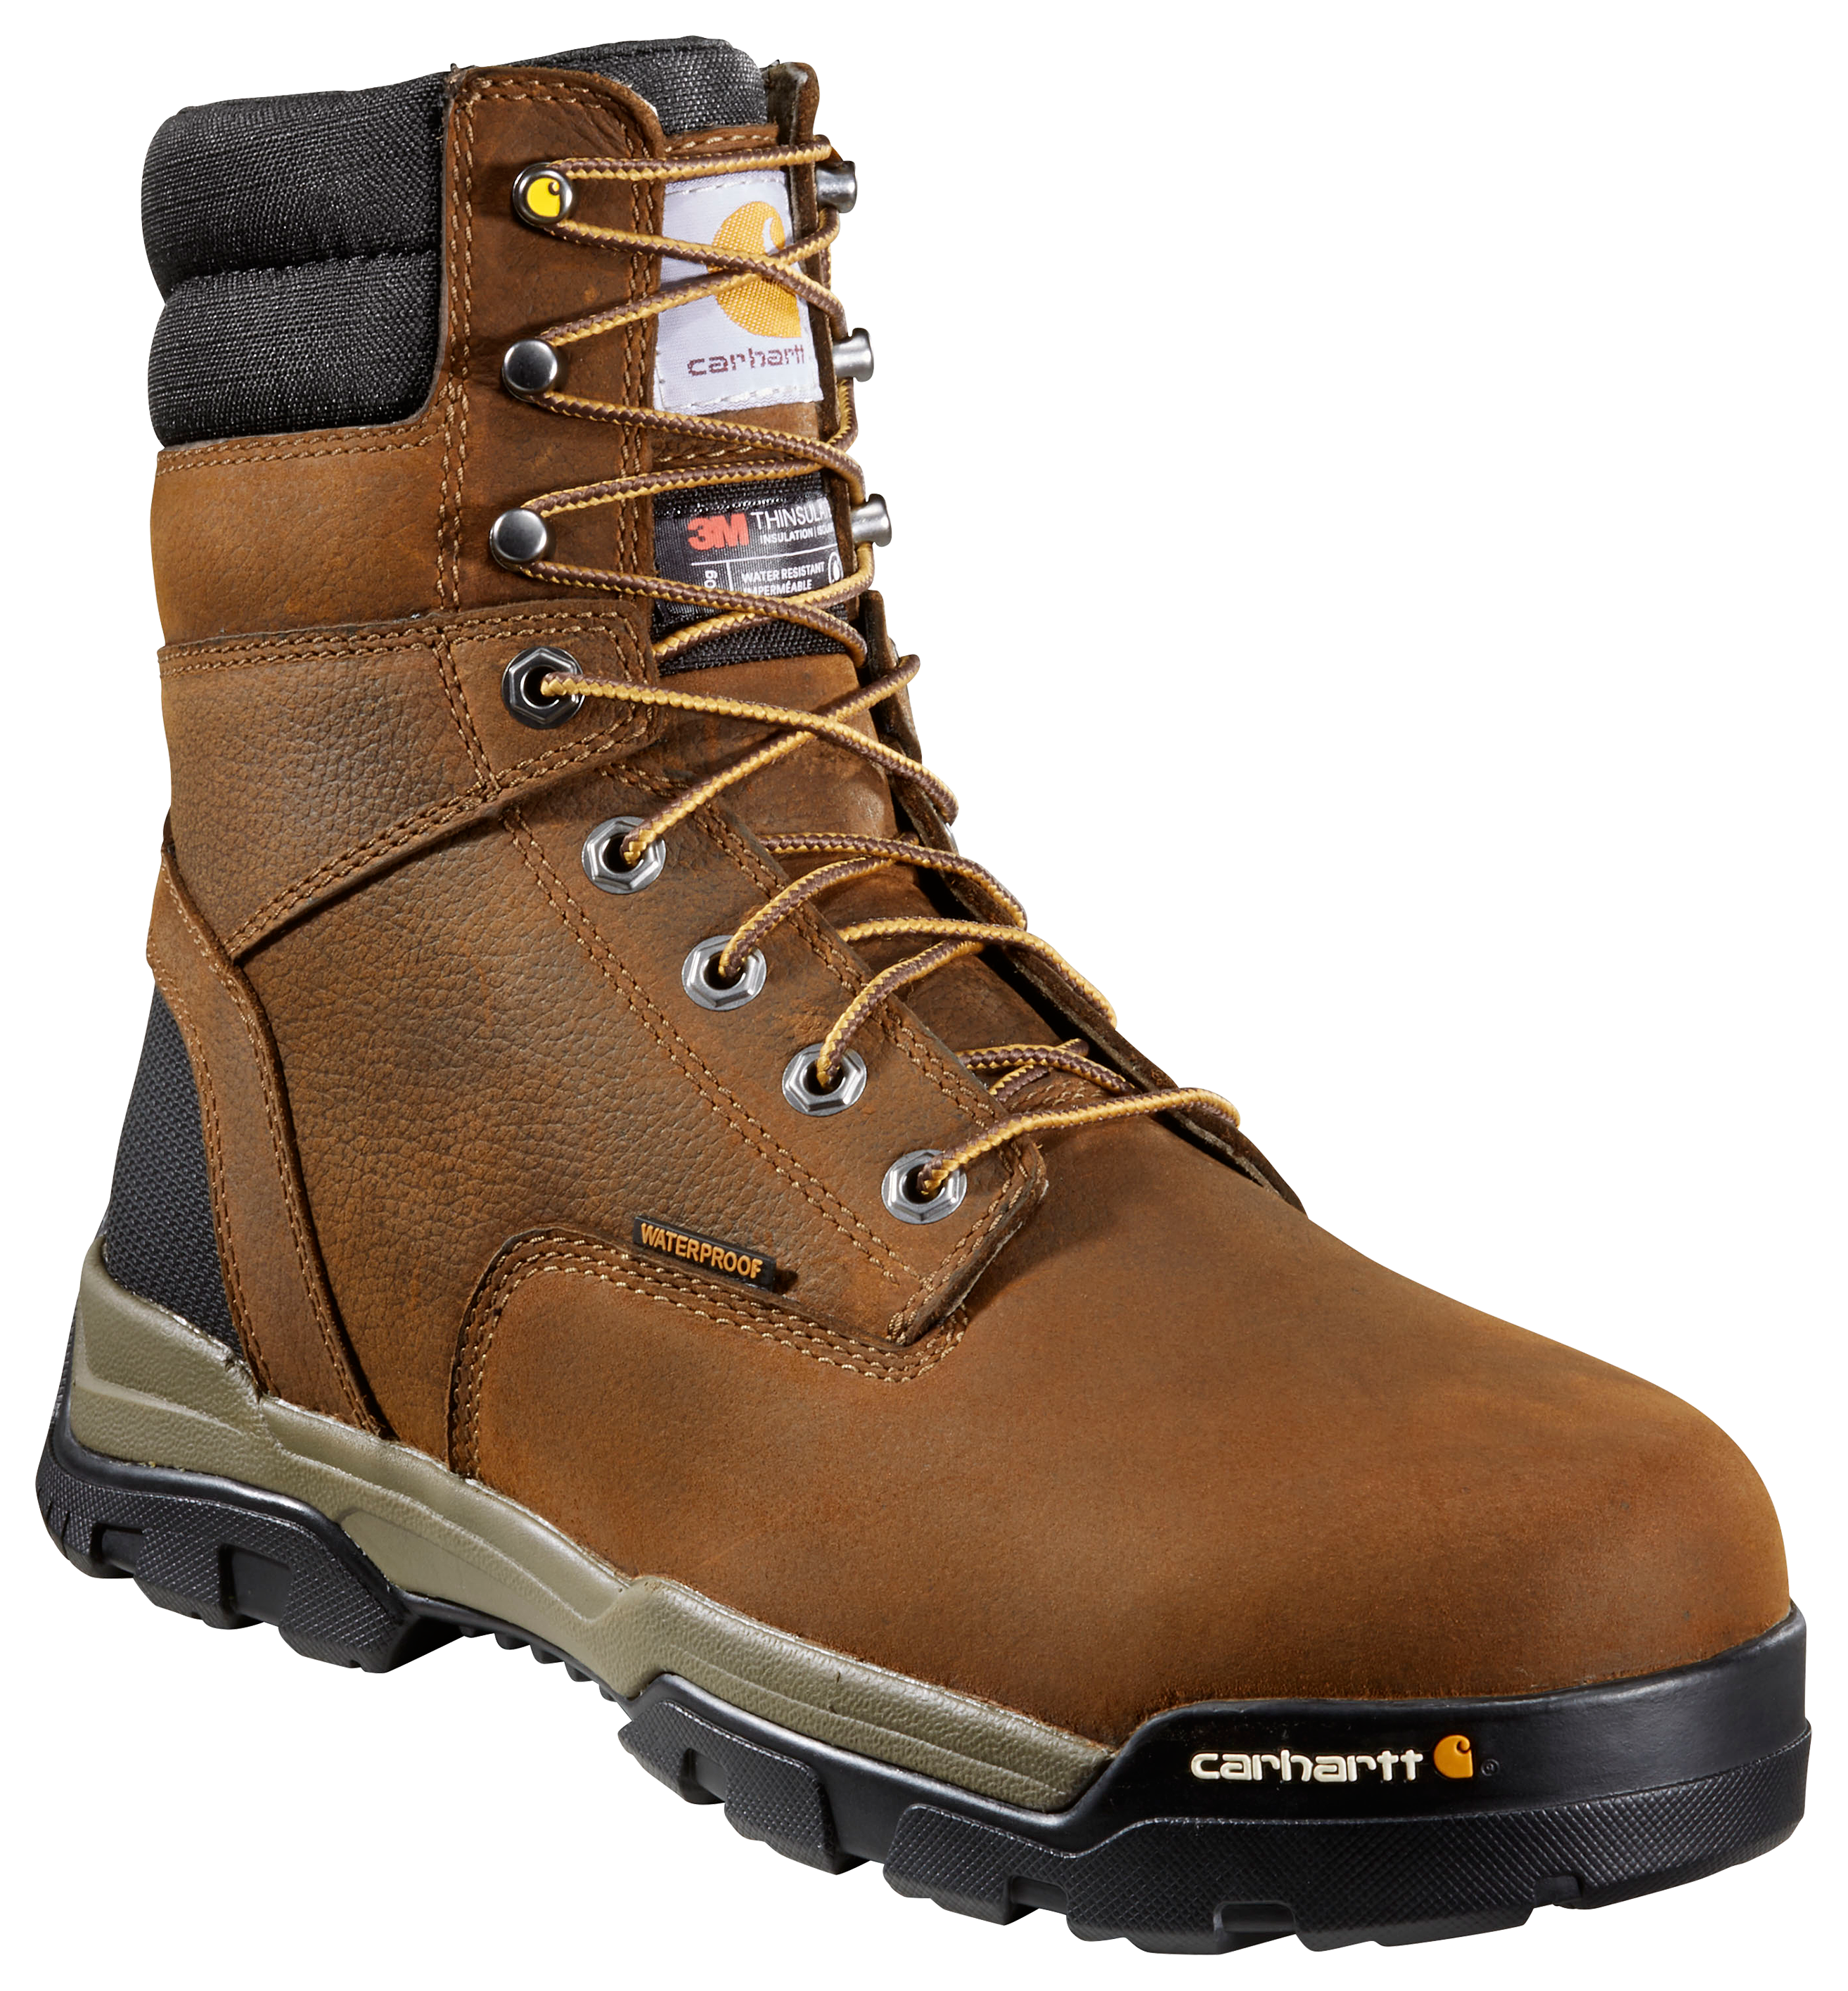 Carhartt Ground Force 8'' Insulated Waterproof Composite-Toe Work Boots for Men